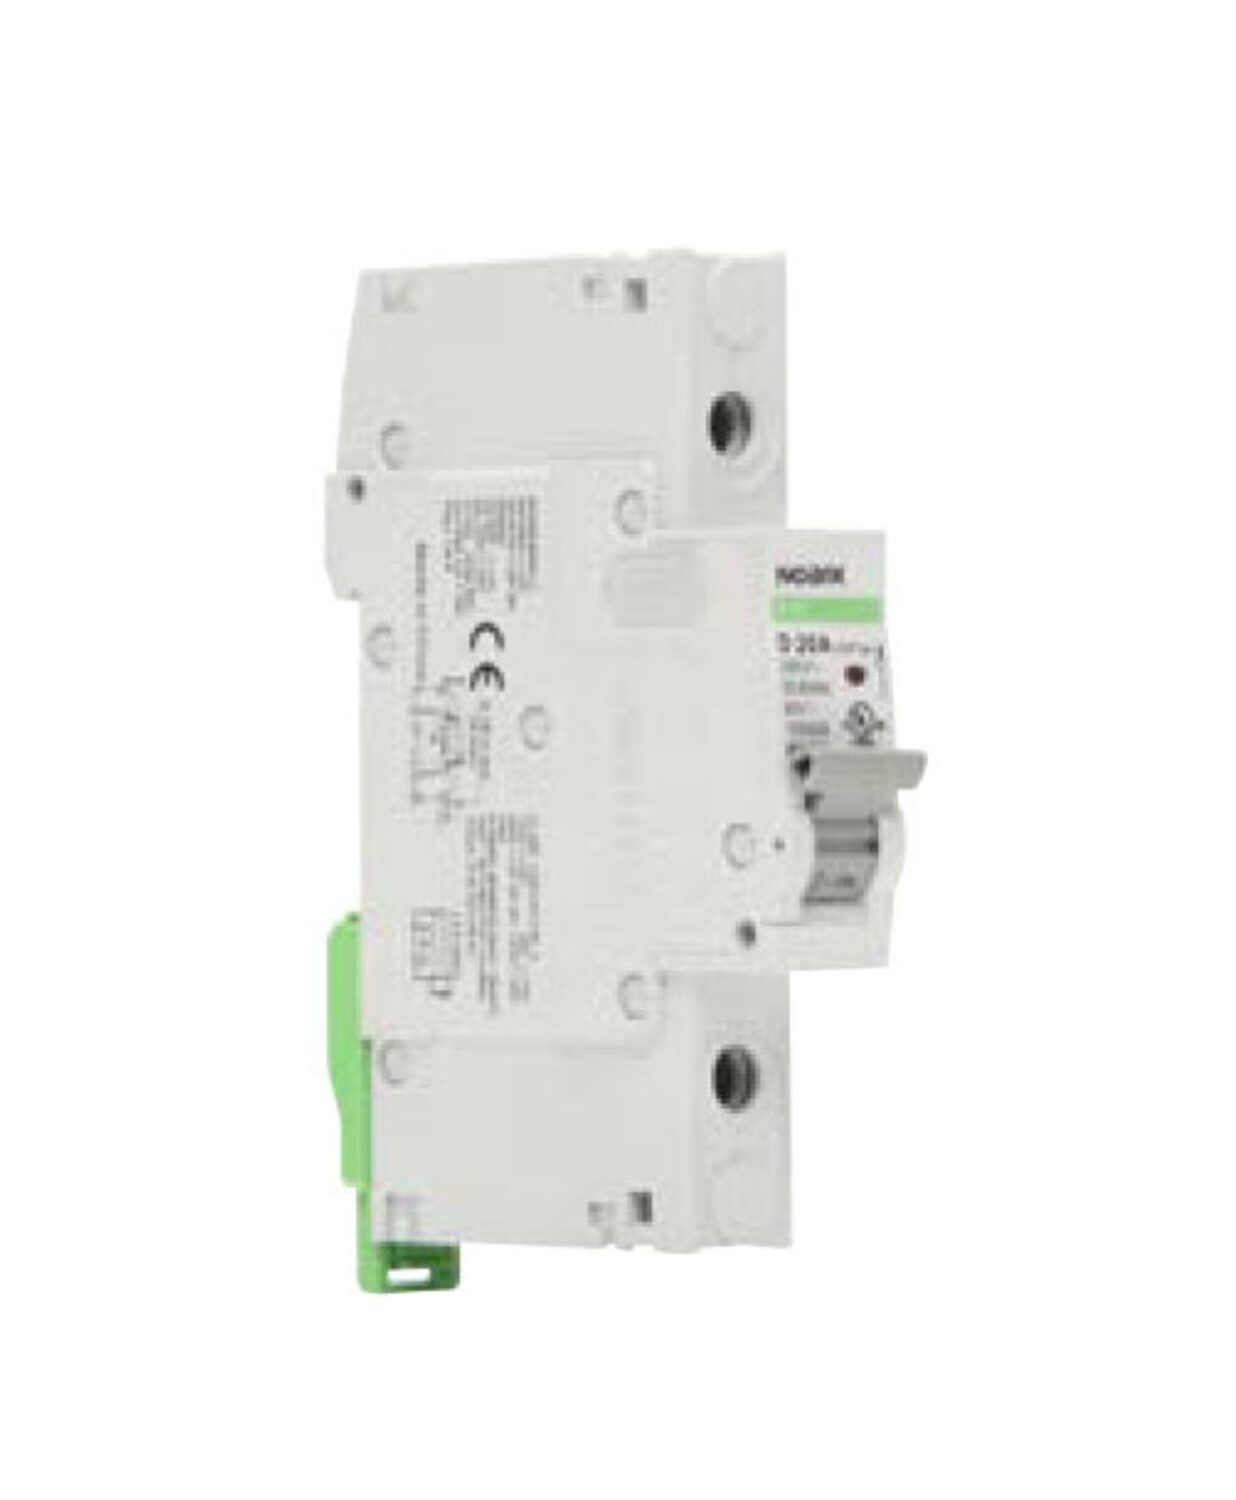 DIN Rail Fuse Holder and Fuses